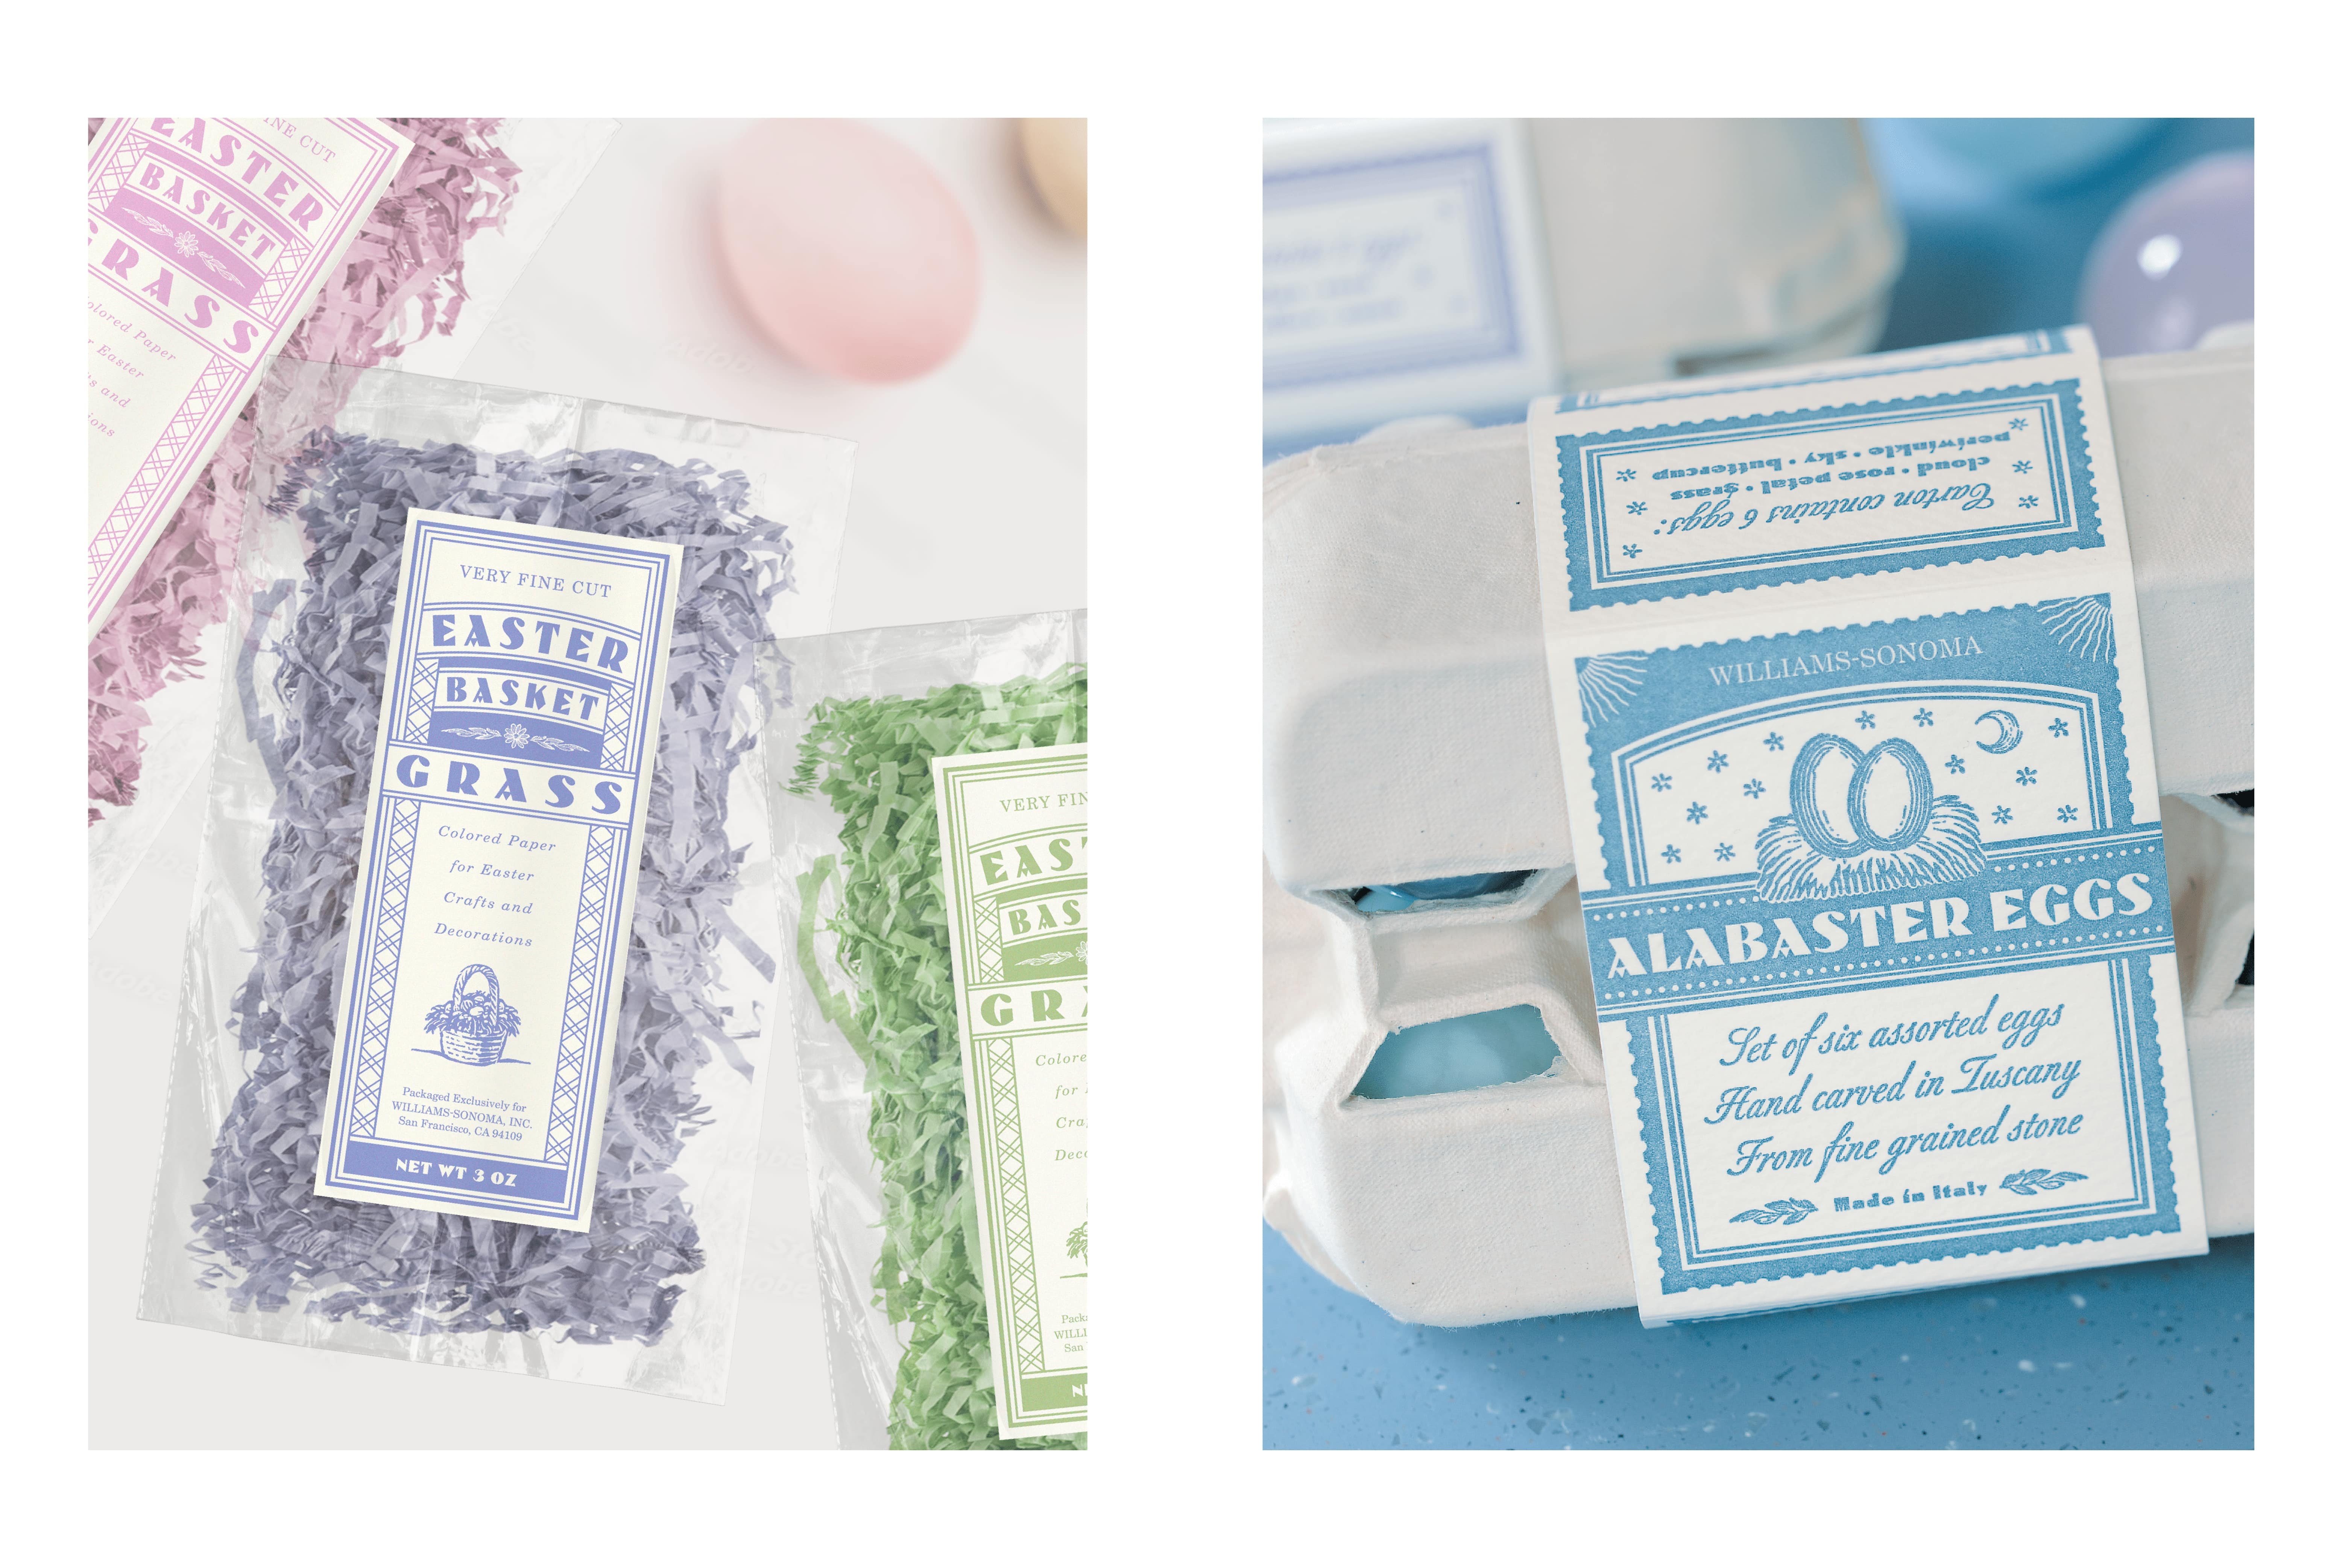 Williams Sonoma Easter packaging